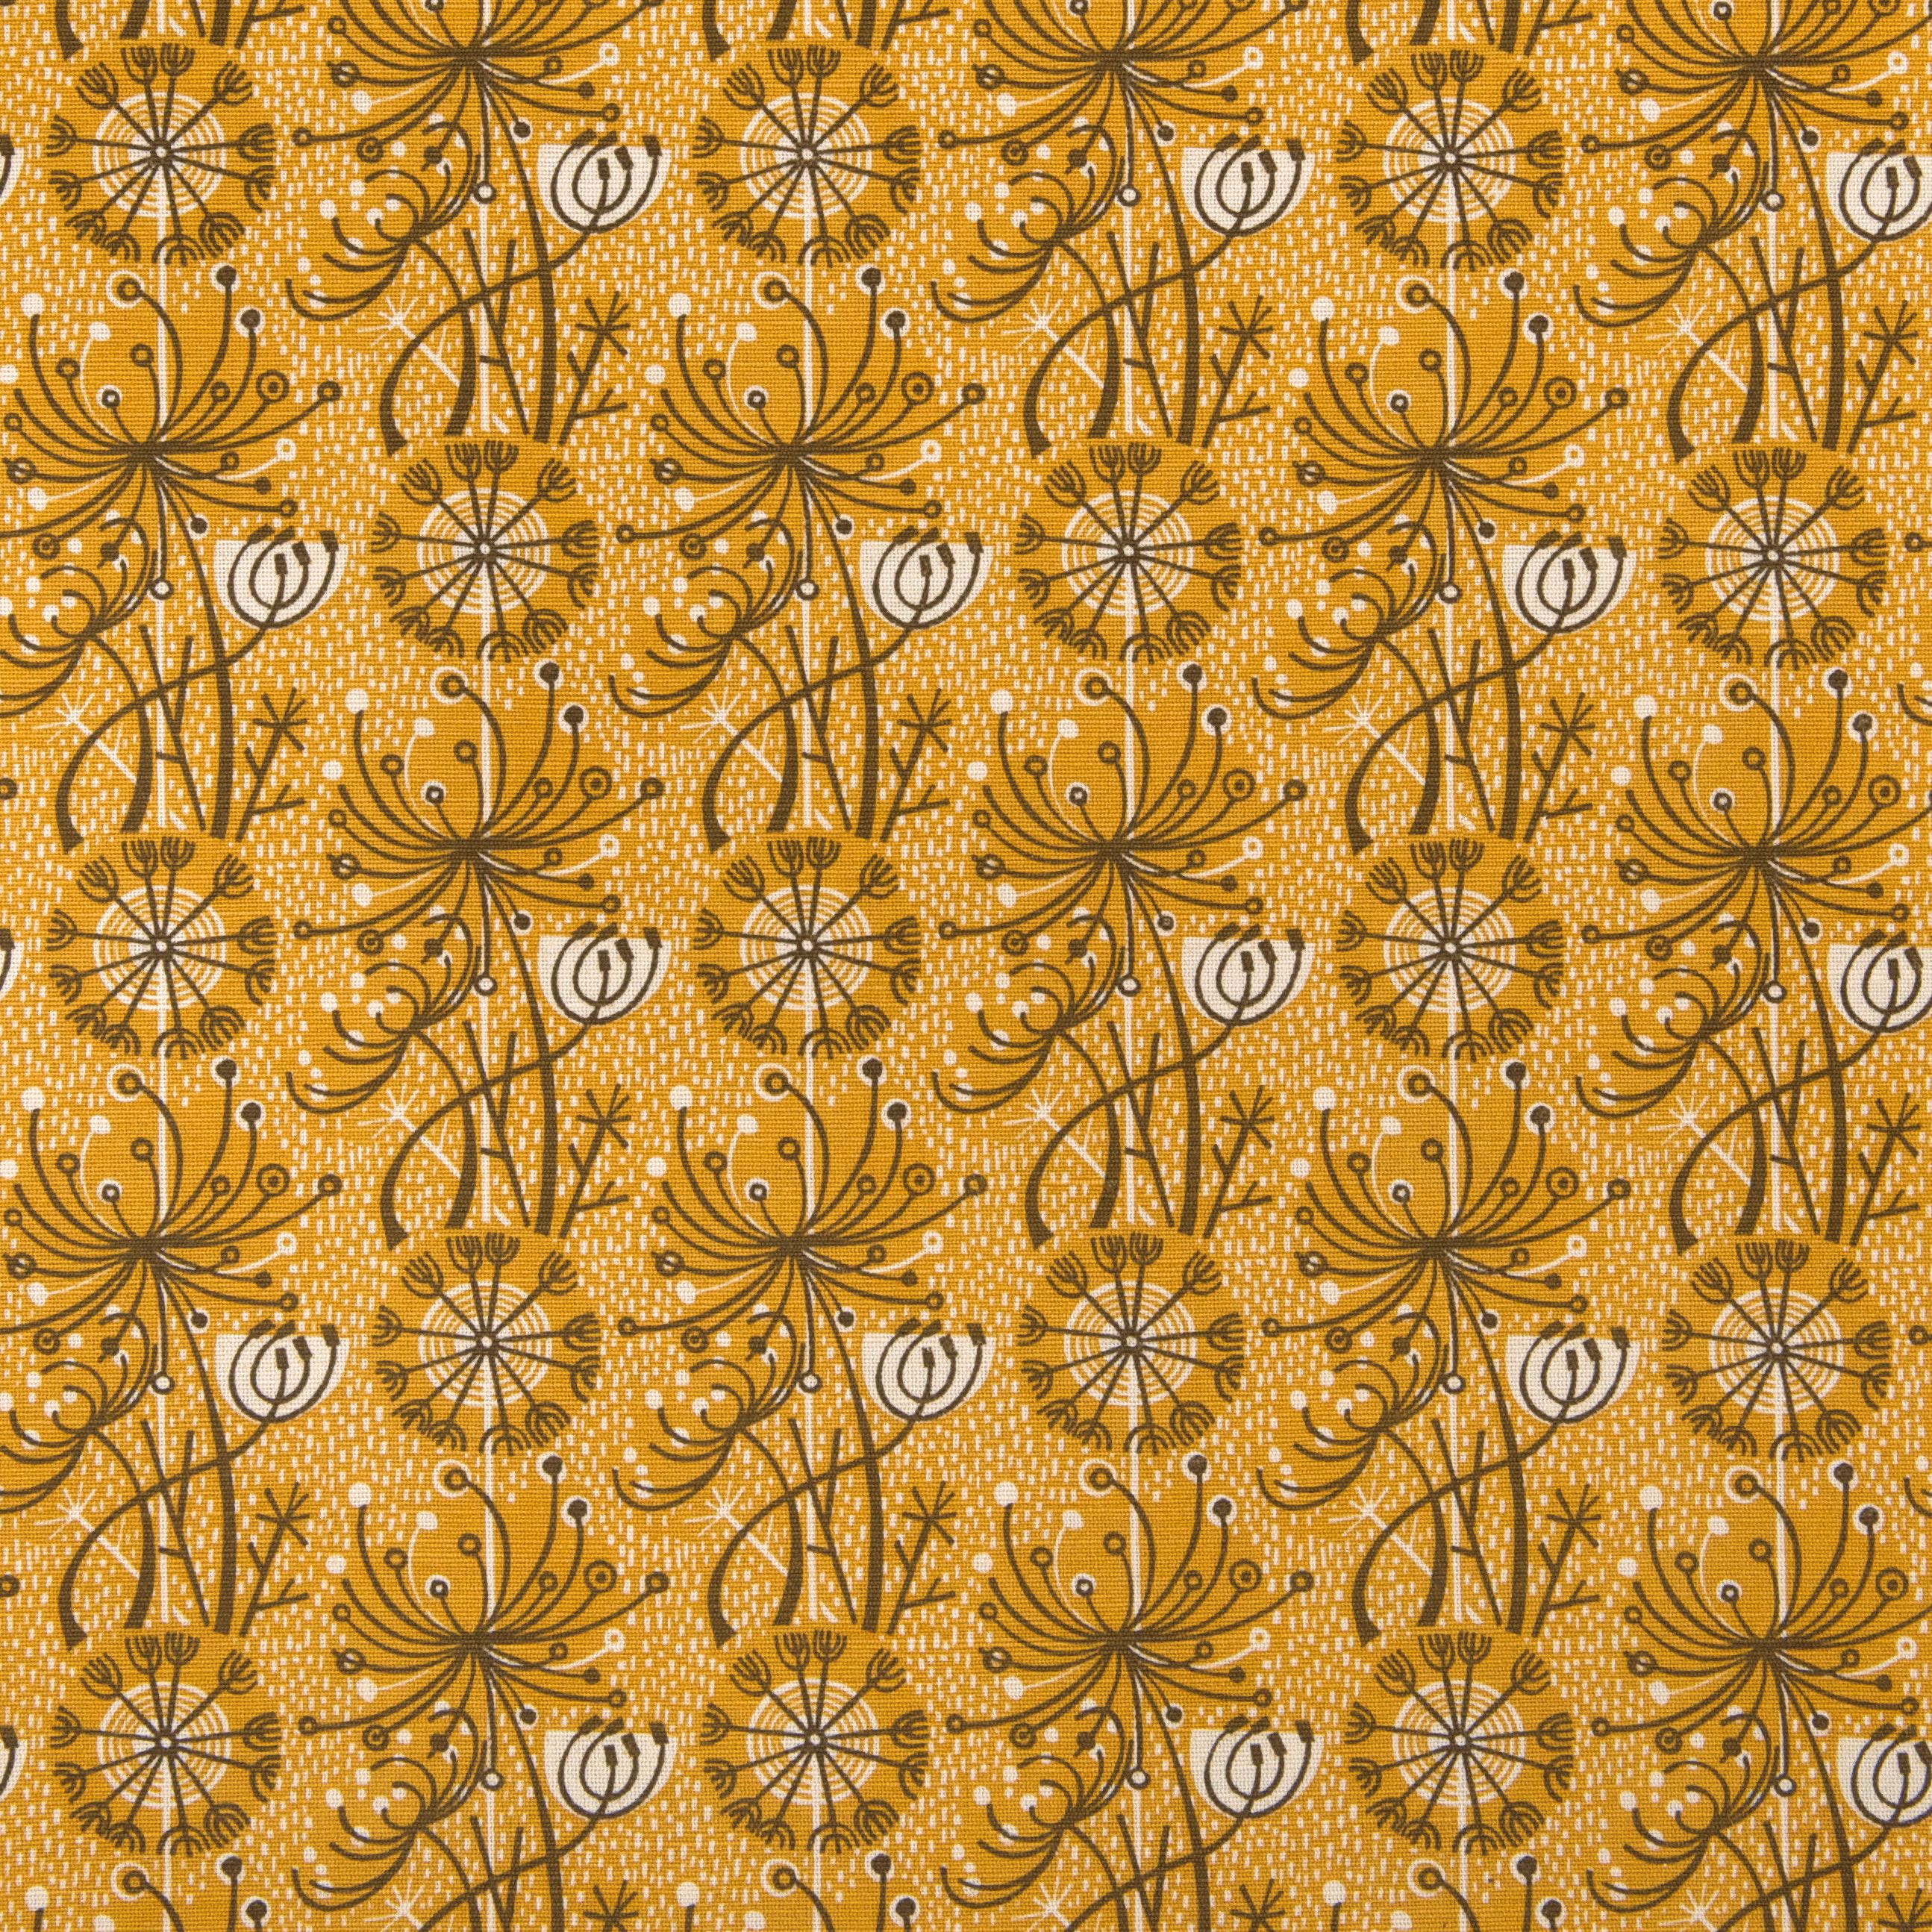 Dandelion One fabric - Angie Lewin (sample room) - St. Jude's Fabrics & Wallpapers